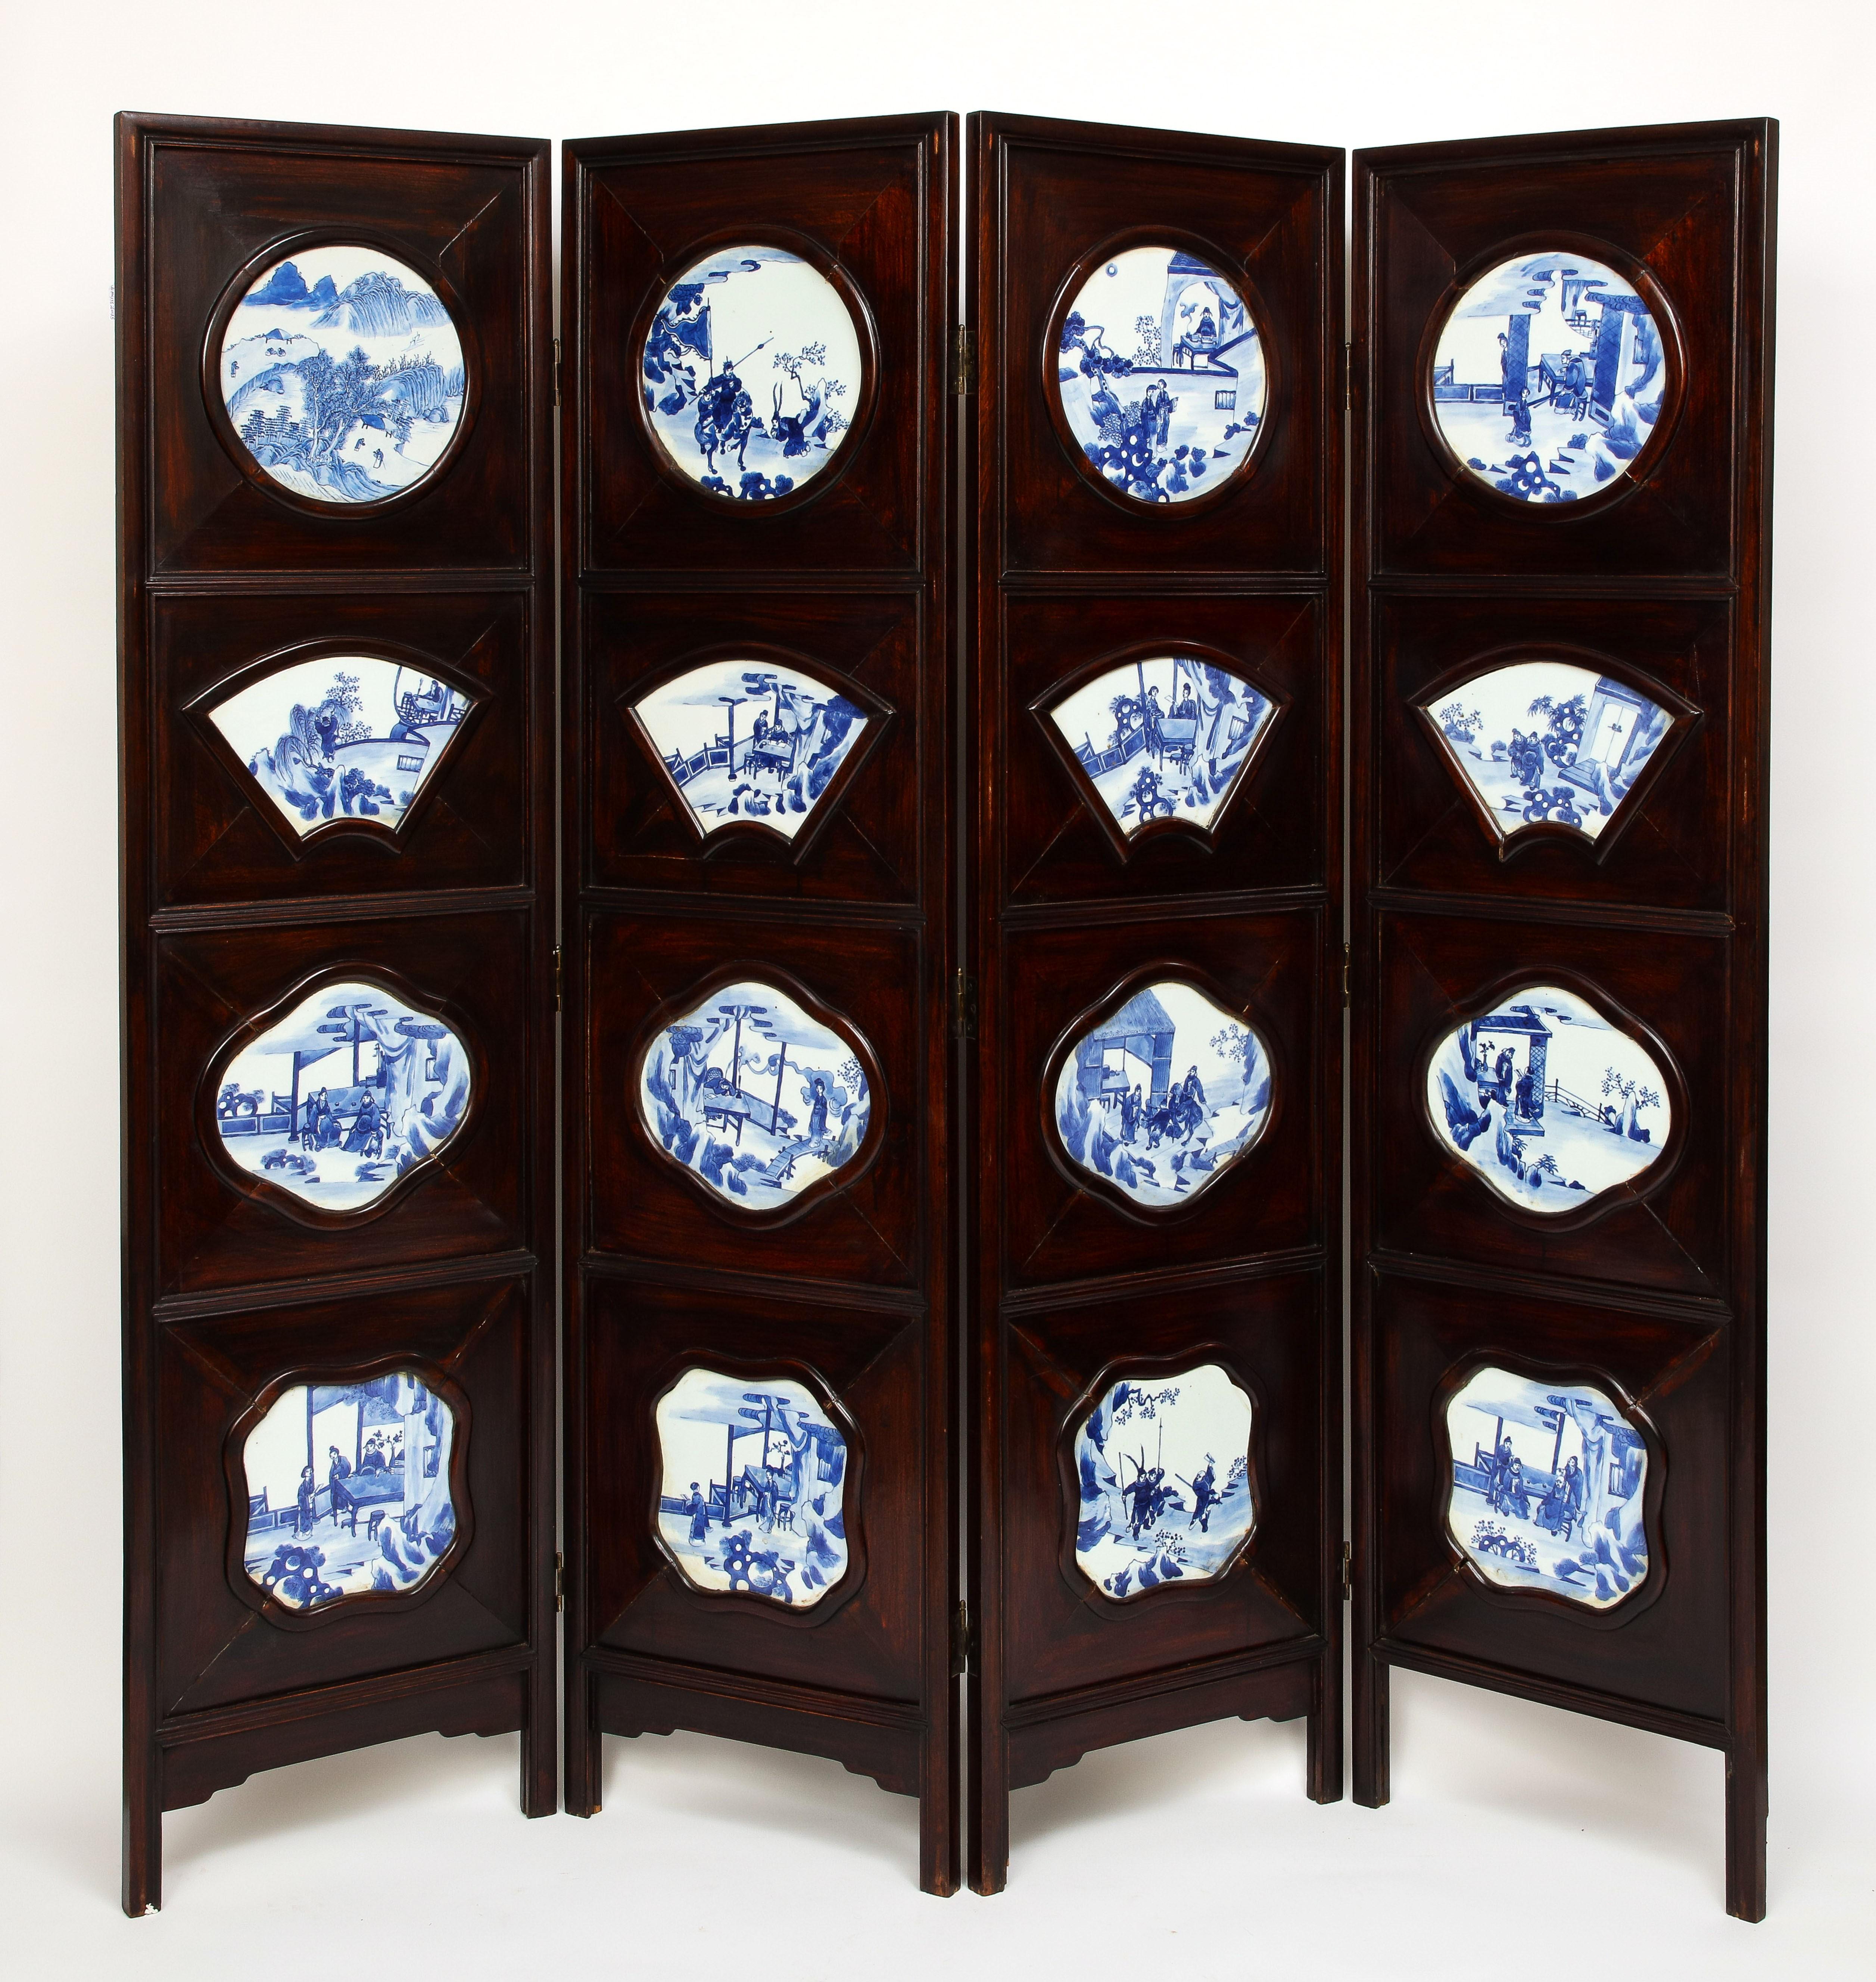 A large Chinese four-fold hardwood screen inset with blue and white porcelain plaques. The hand carved wood frame is a very dense and naturally rich and dark hardwood from China with four vertical panels and four horizontal rows of blue and white